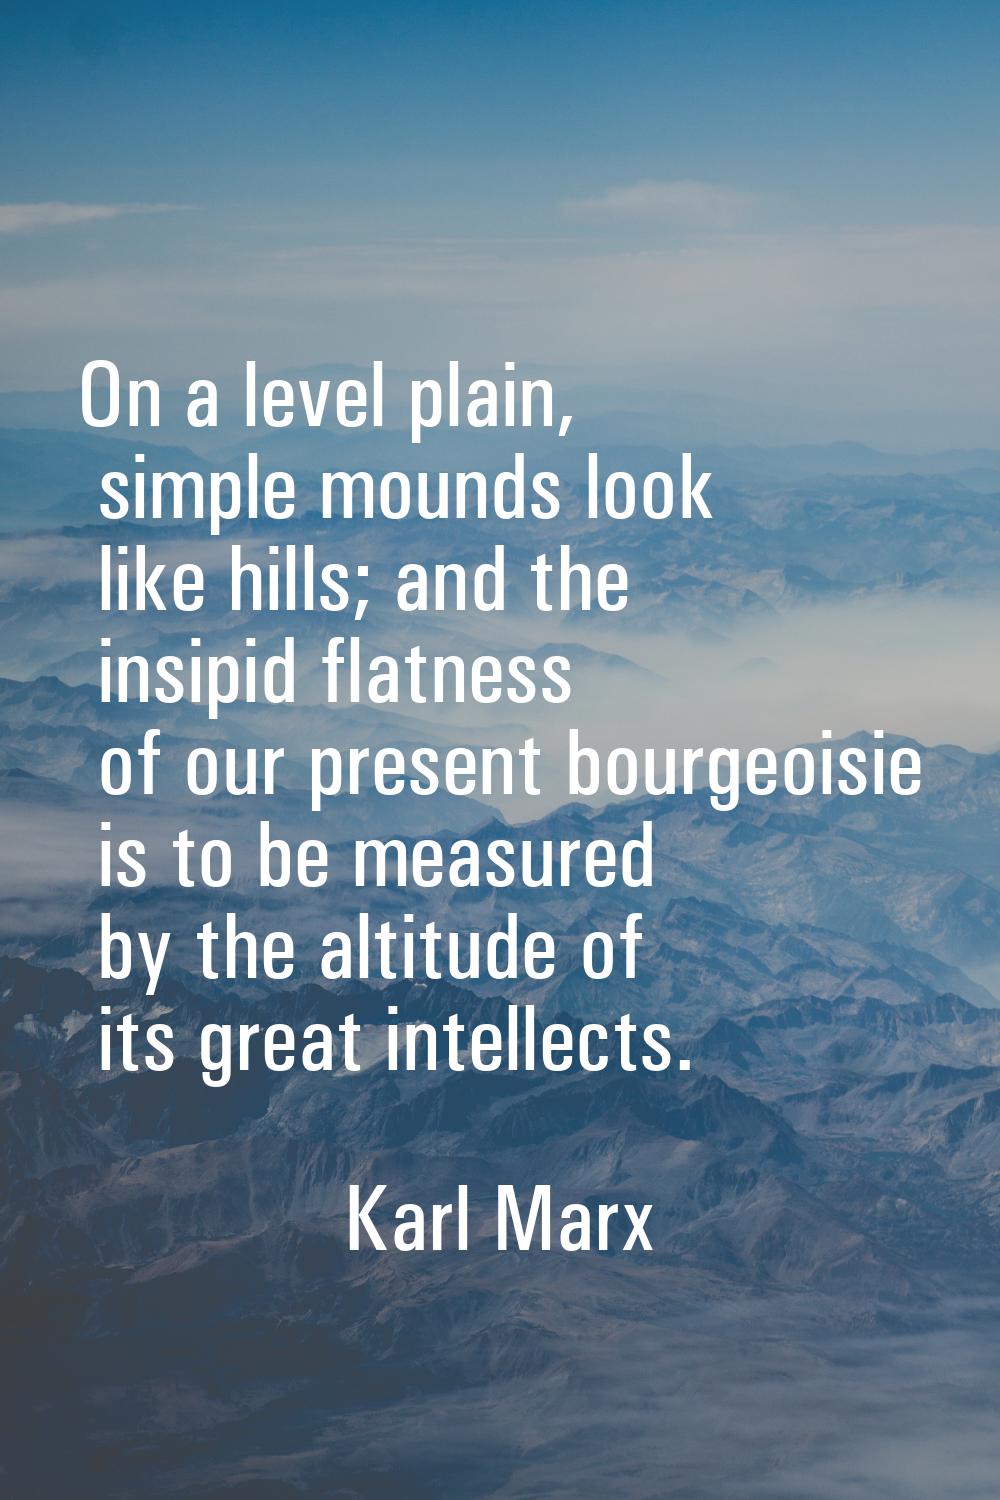 On a level plain, simple mounds look like hills; and the insipid flatness of our present bourgeoisi